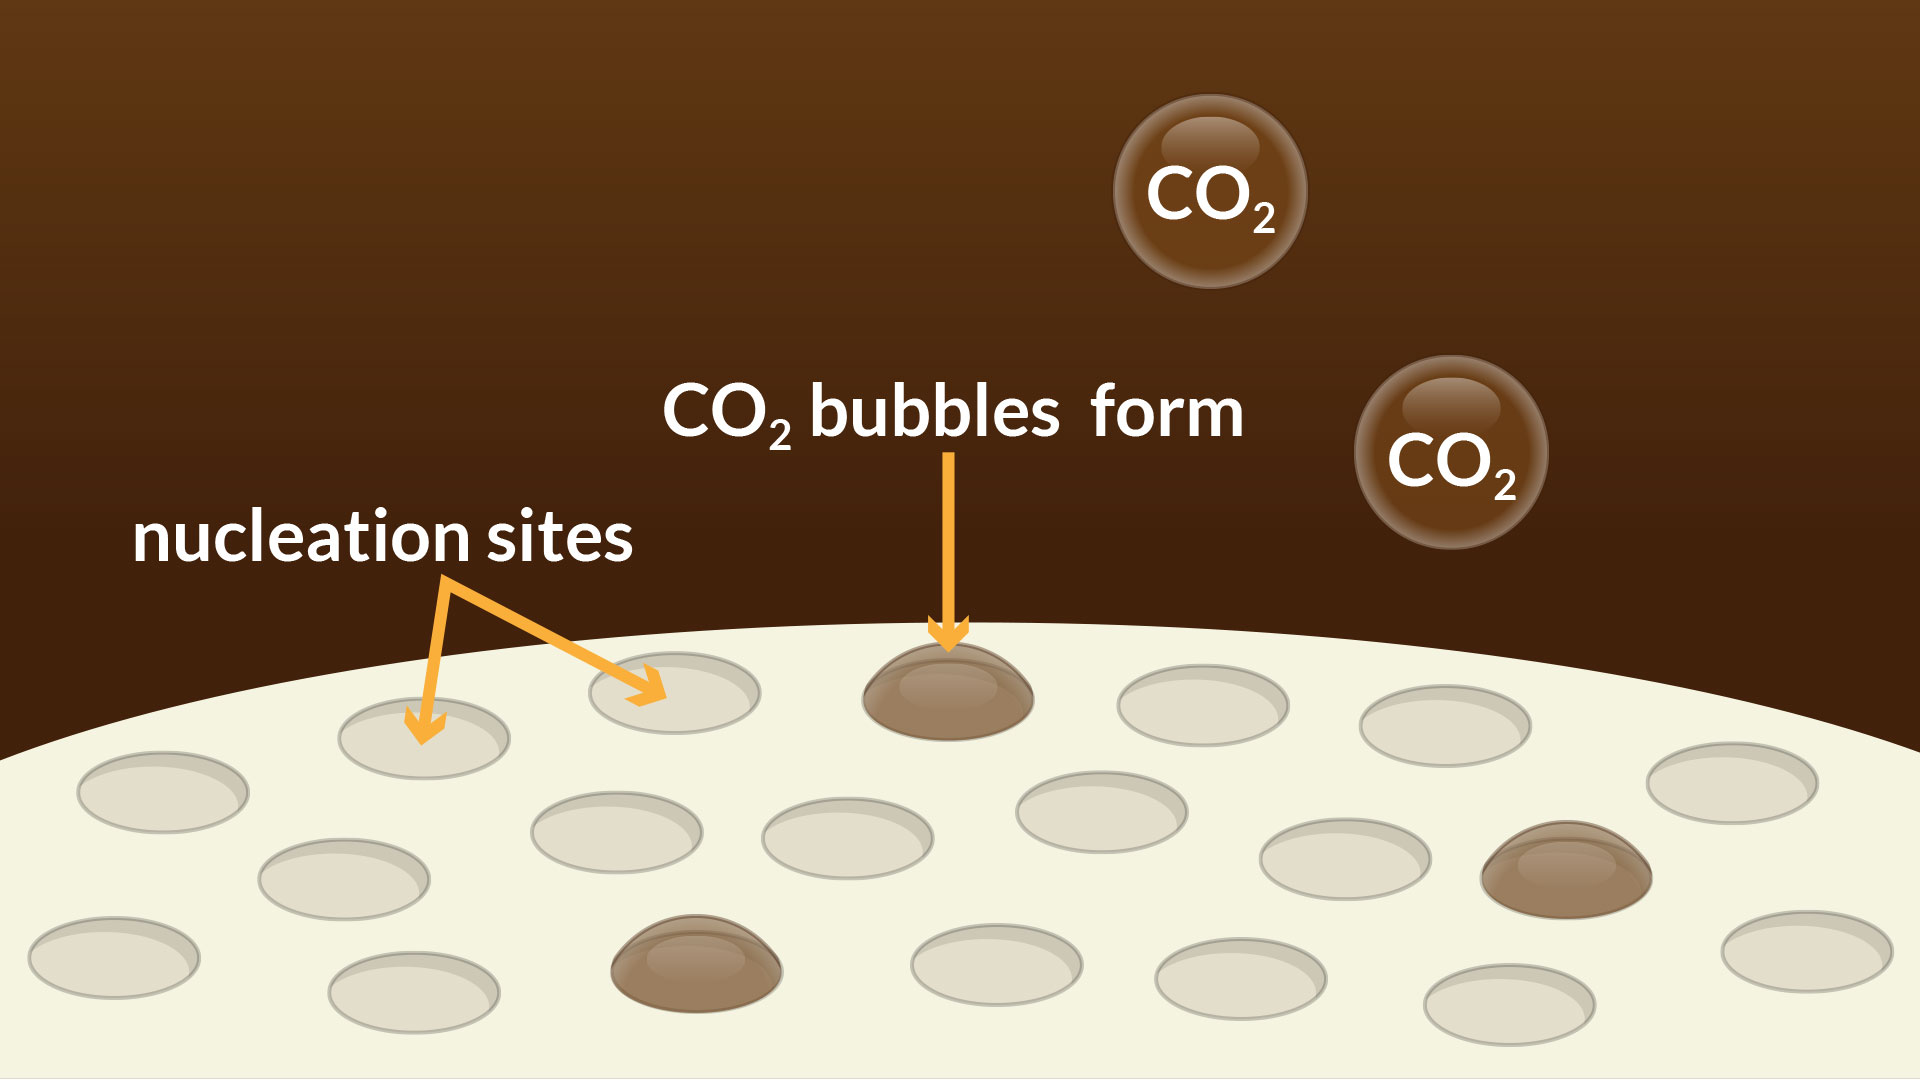 Schematic of CO2 bubbles floating above small indentations on the surface of a Mentos candy. These are the nucleation sites where gas molecules can congregate.